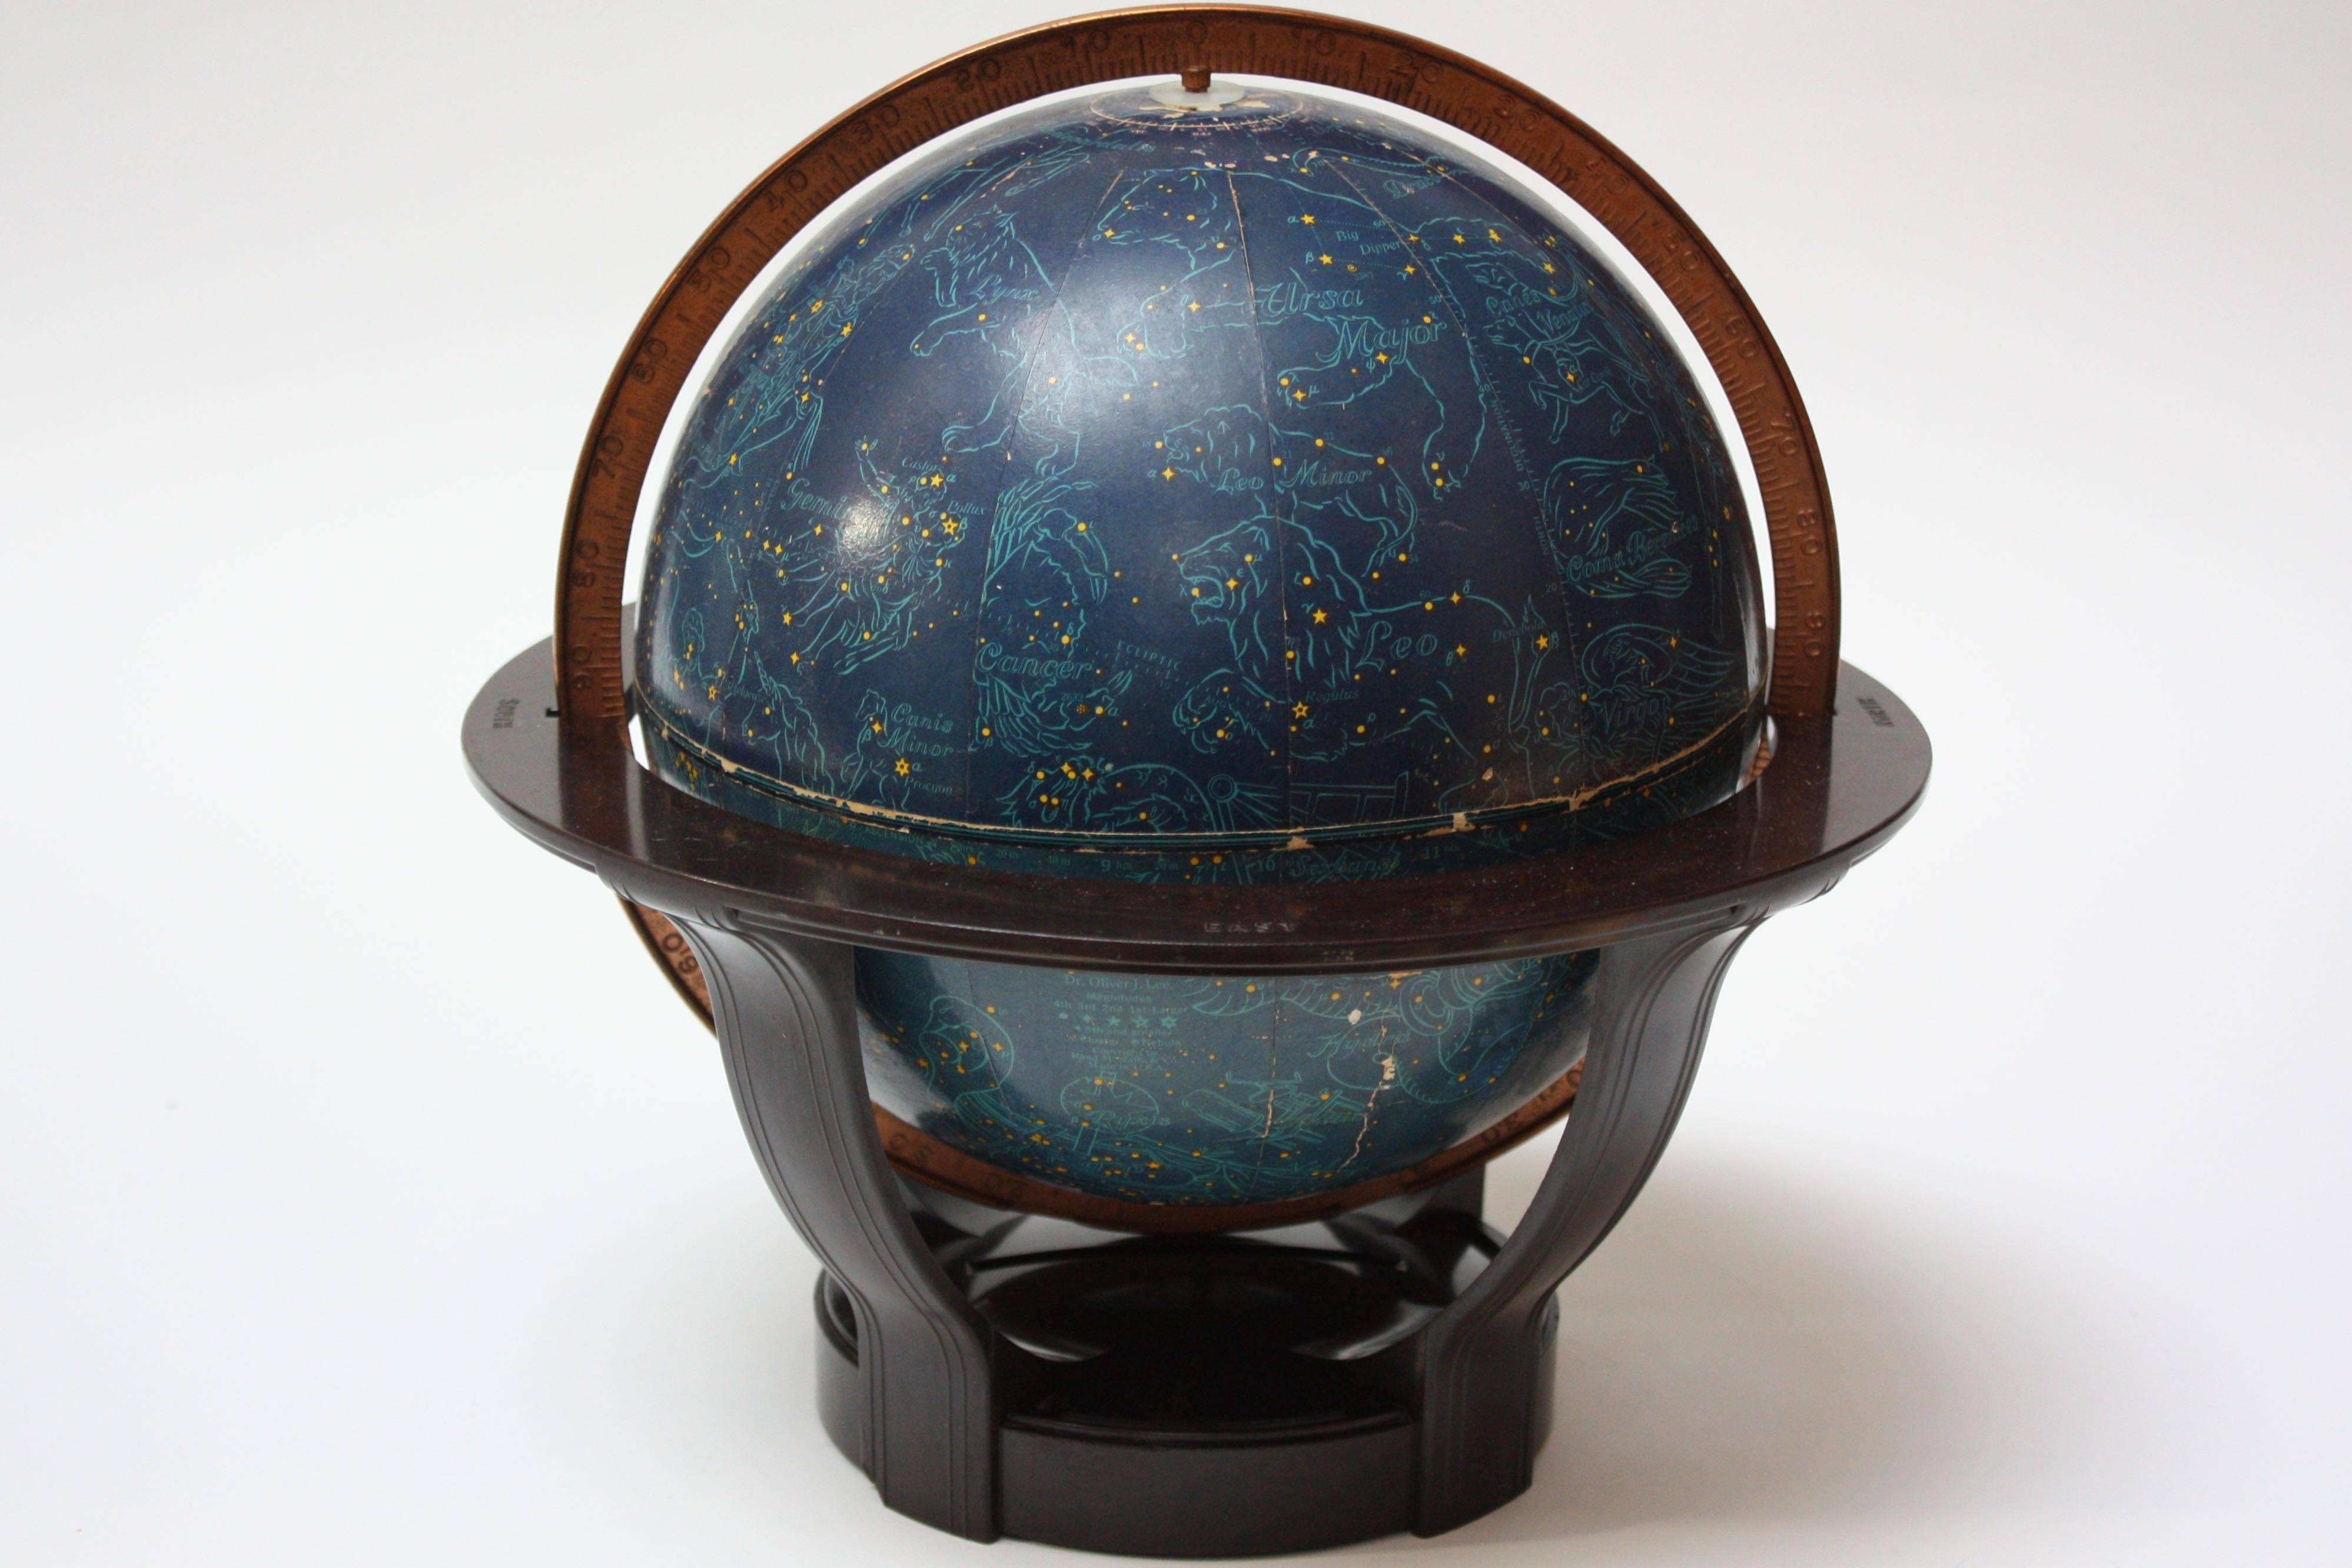 This unique Celestial globe was designed by Rand McNally in the 1940s and edited by Dr. Oliver J. Lee (as indicated on the globe itself). It depicts mythological zodiac characters and traditional constellations as light blue outlined figures and